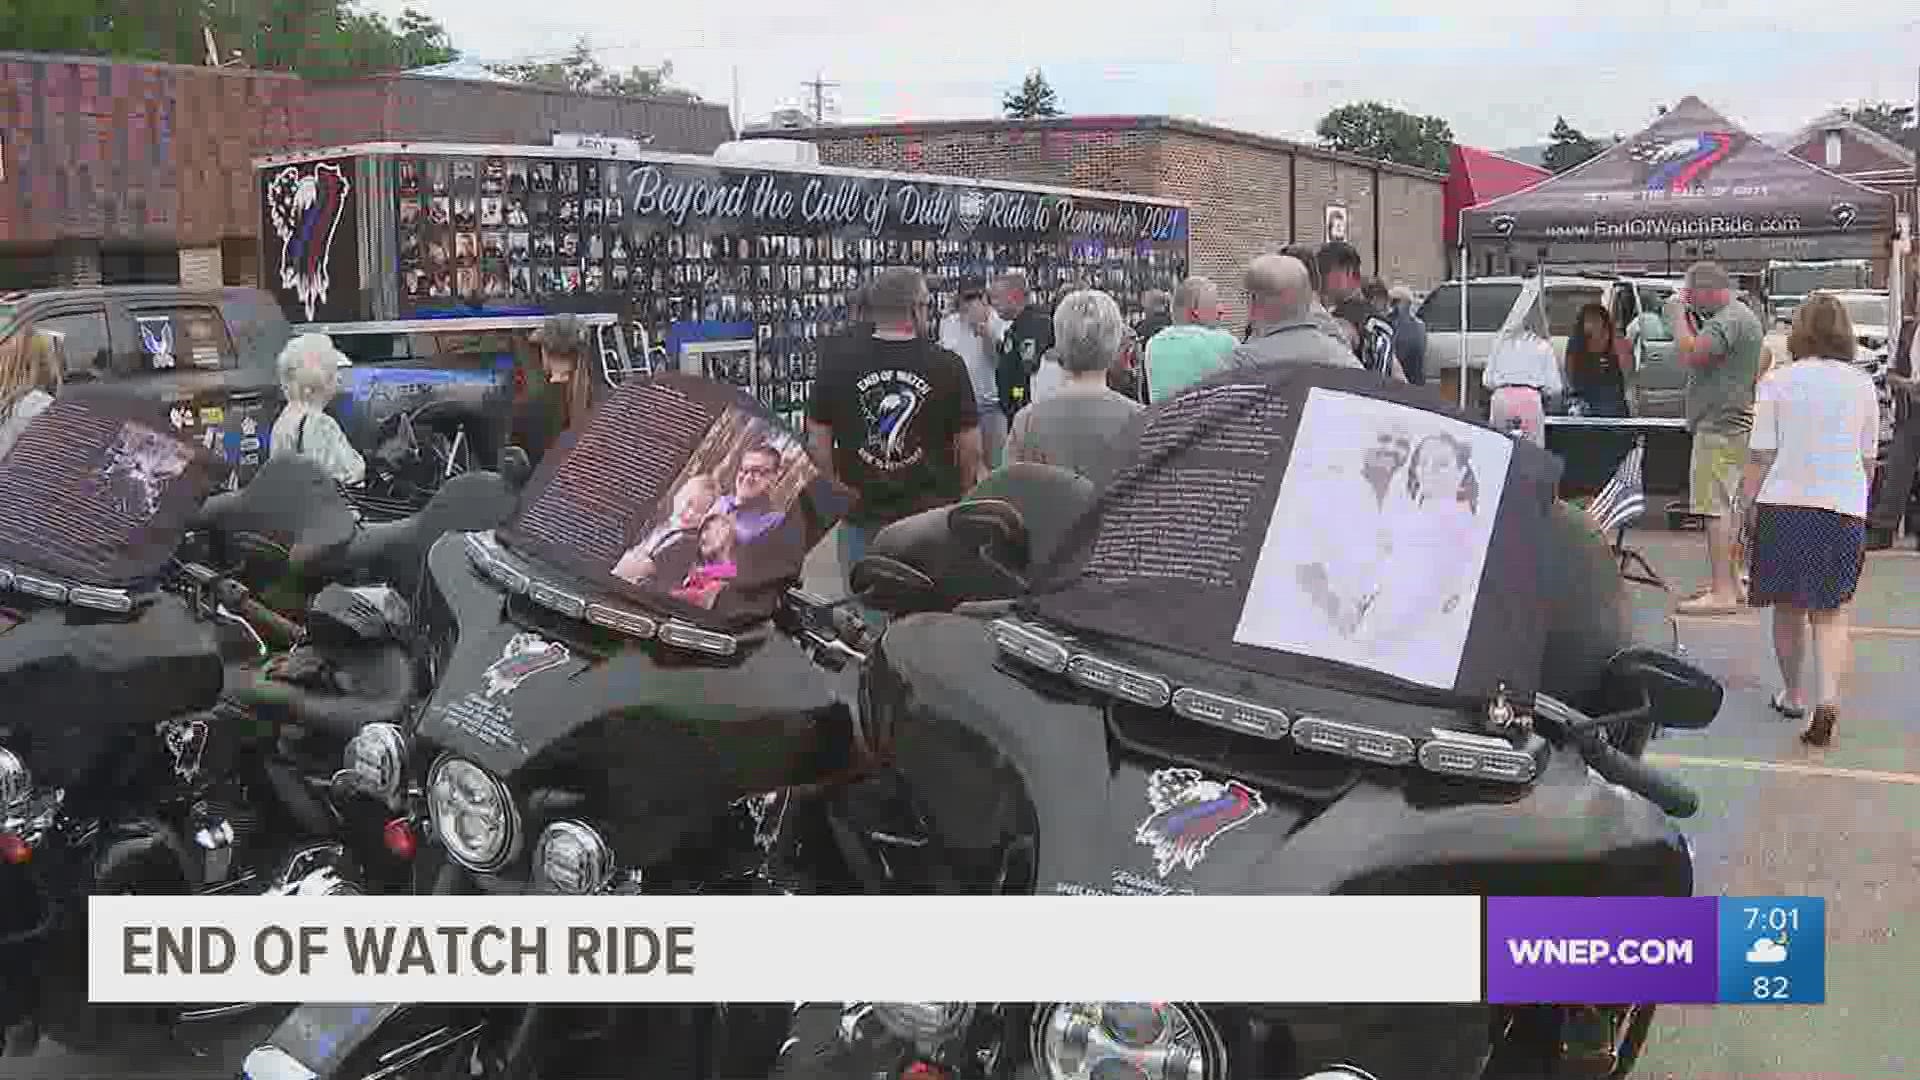 The End of Watch Ride pays tribute to law enforcement officers who died in the line of duty.